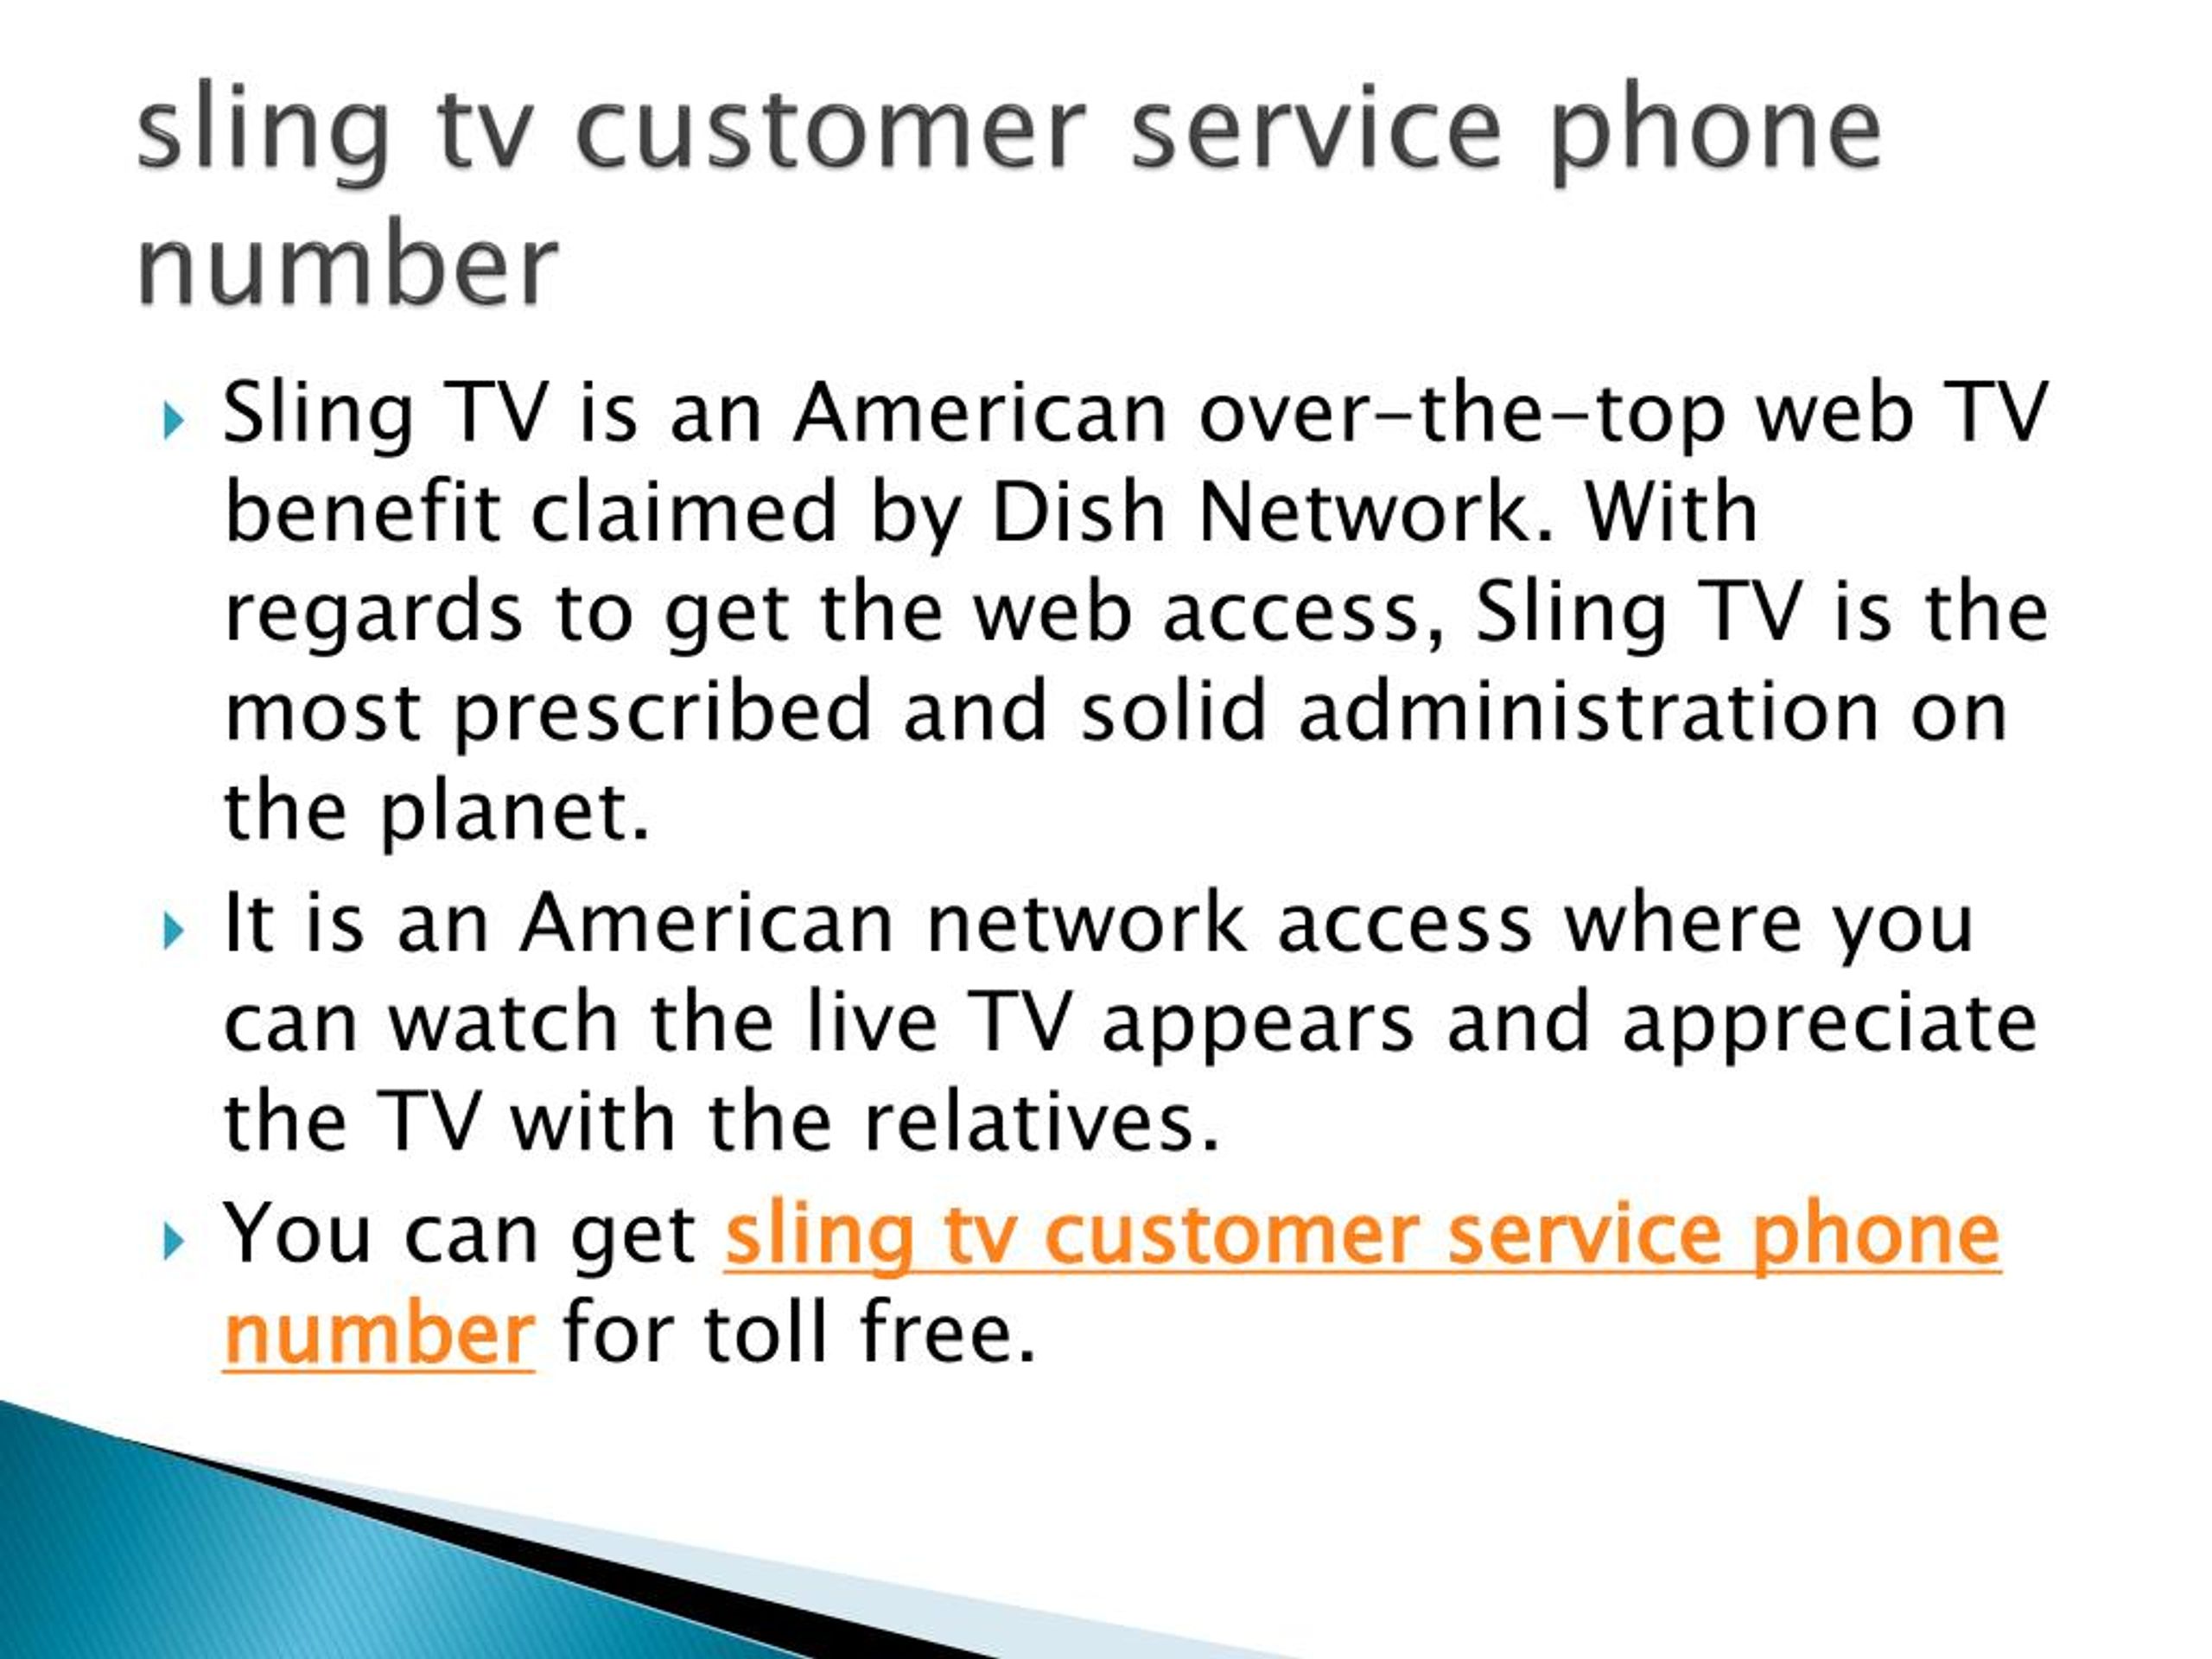 PPT sling tv customer service phone number PowerPoint Presentation